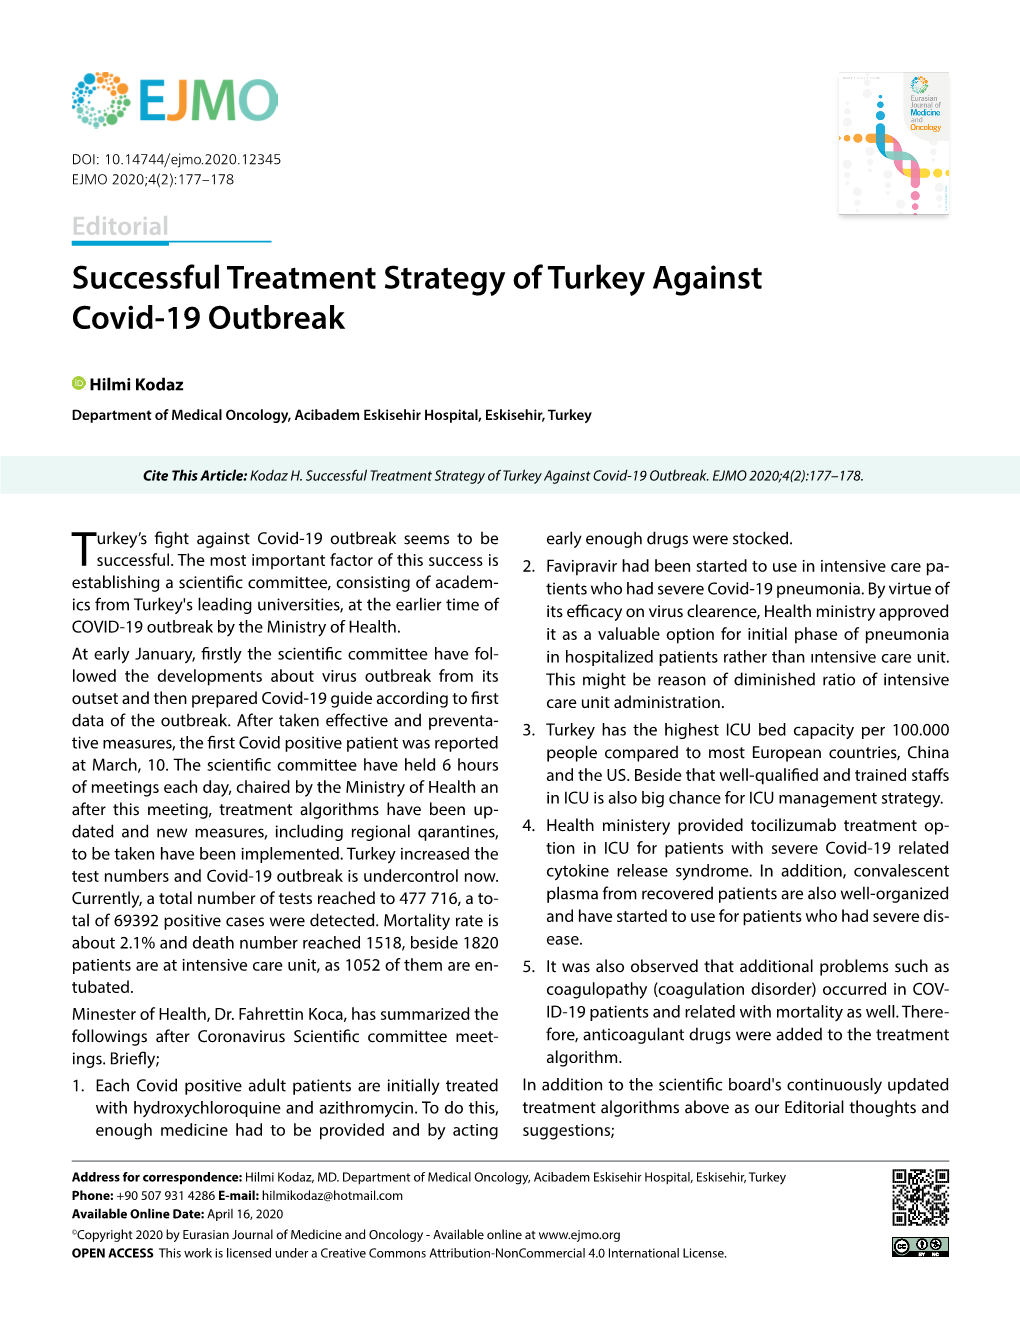 Successful Treatment Strategy of Turkey Against Covid-19 Outbreak